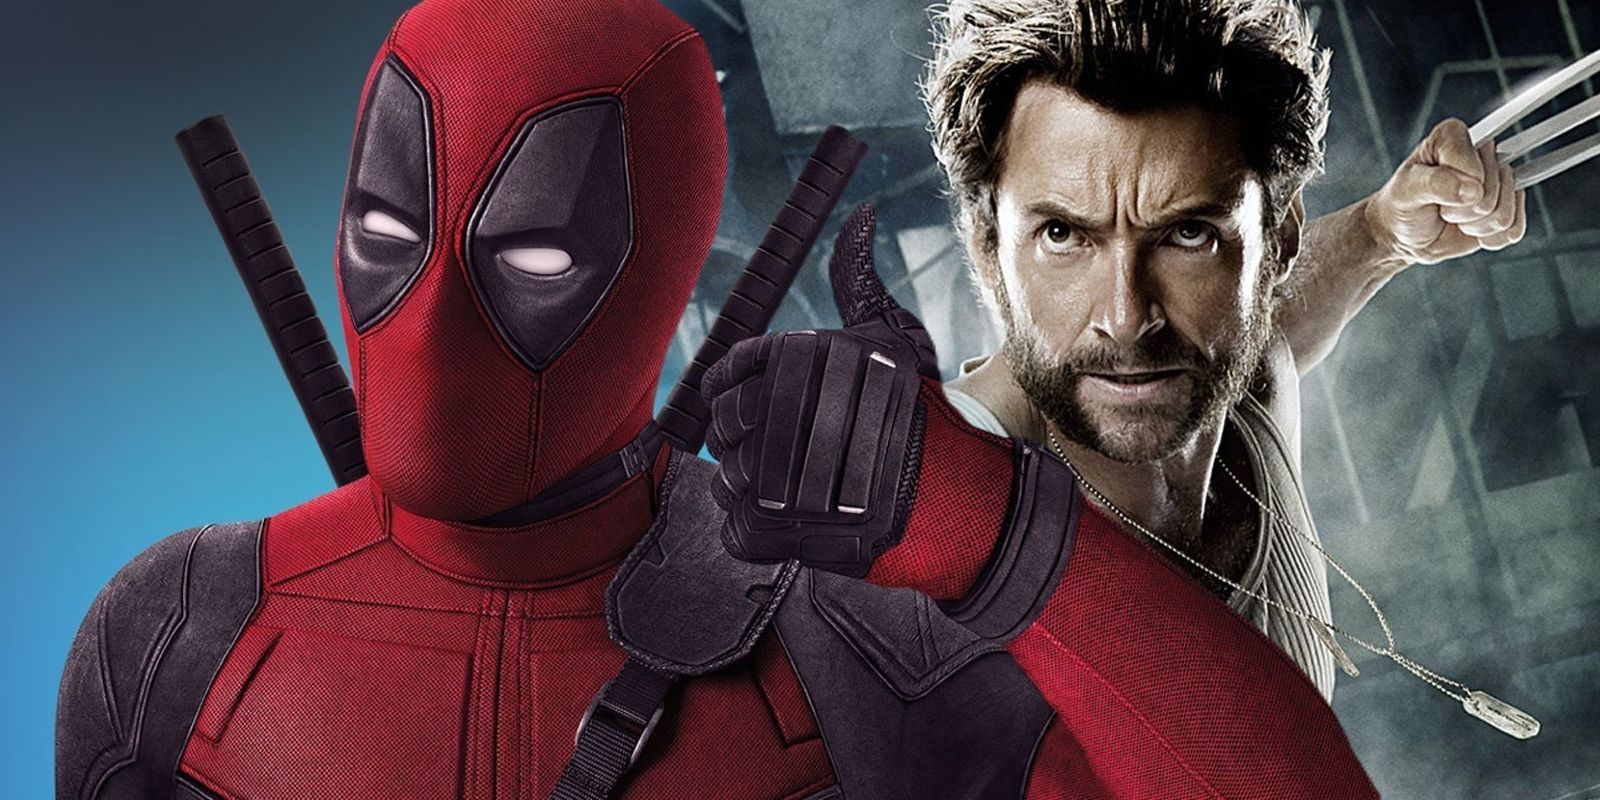 Split Image: Deadpool (masked) giving a thumbs up, Wolverine (Hugh Jackman) extending his claws